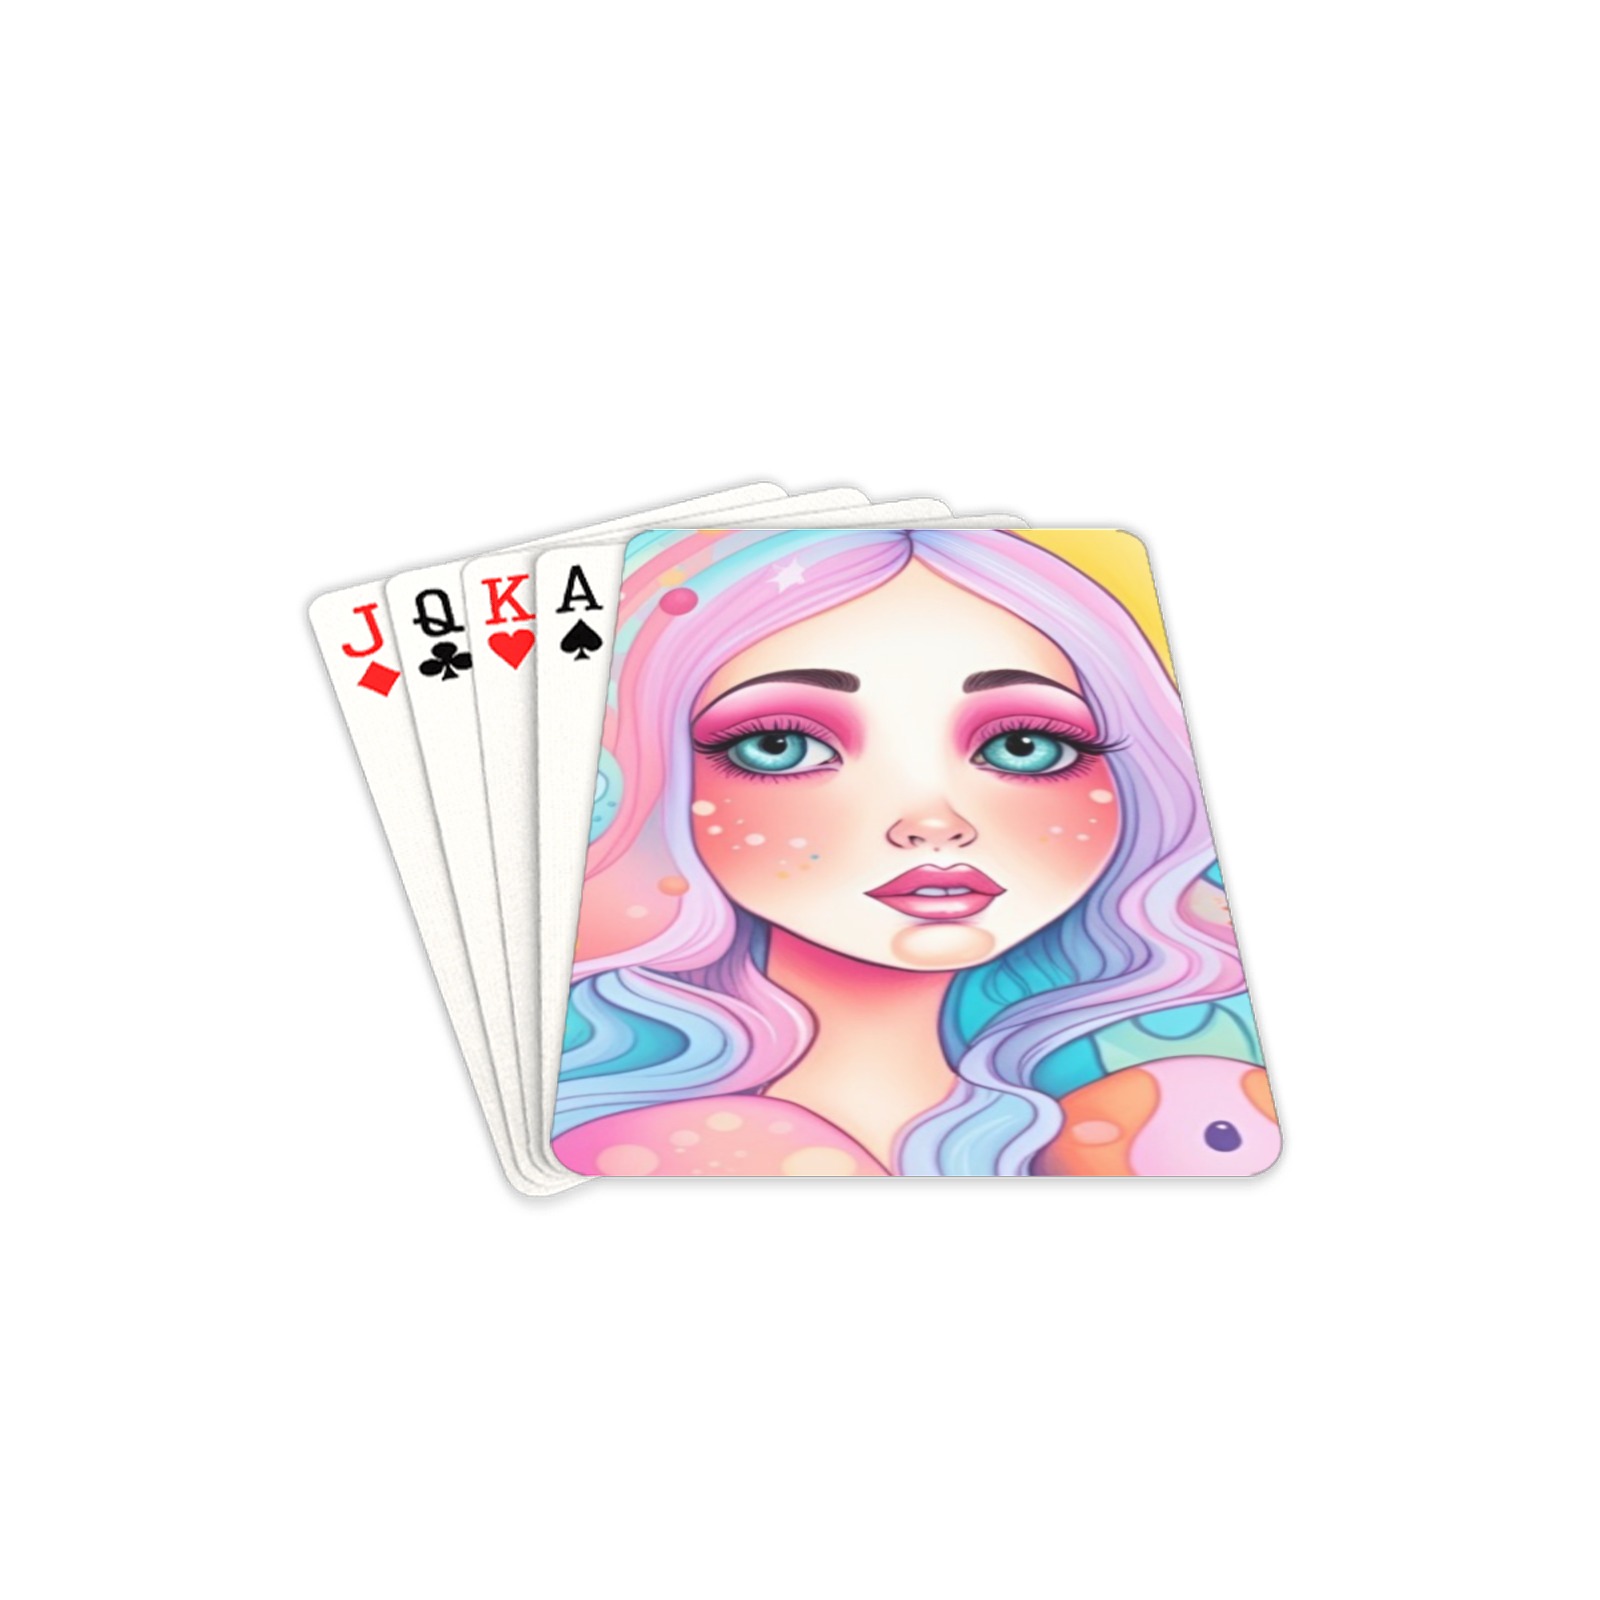 Anime Girl Yes No Oracles Deck Playing Cards 2.5"x3.5"